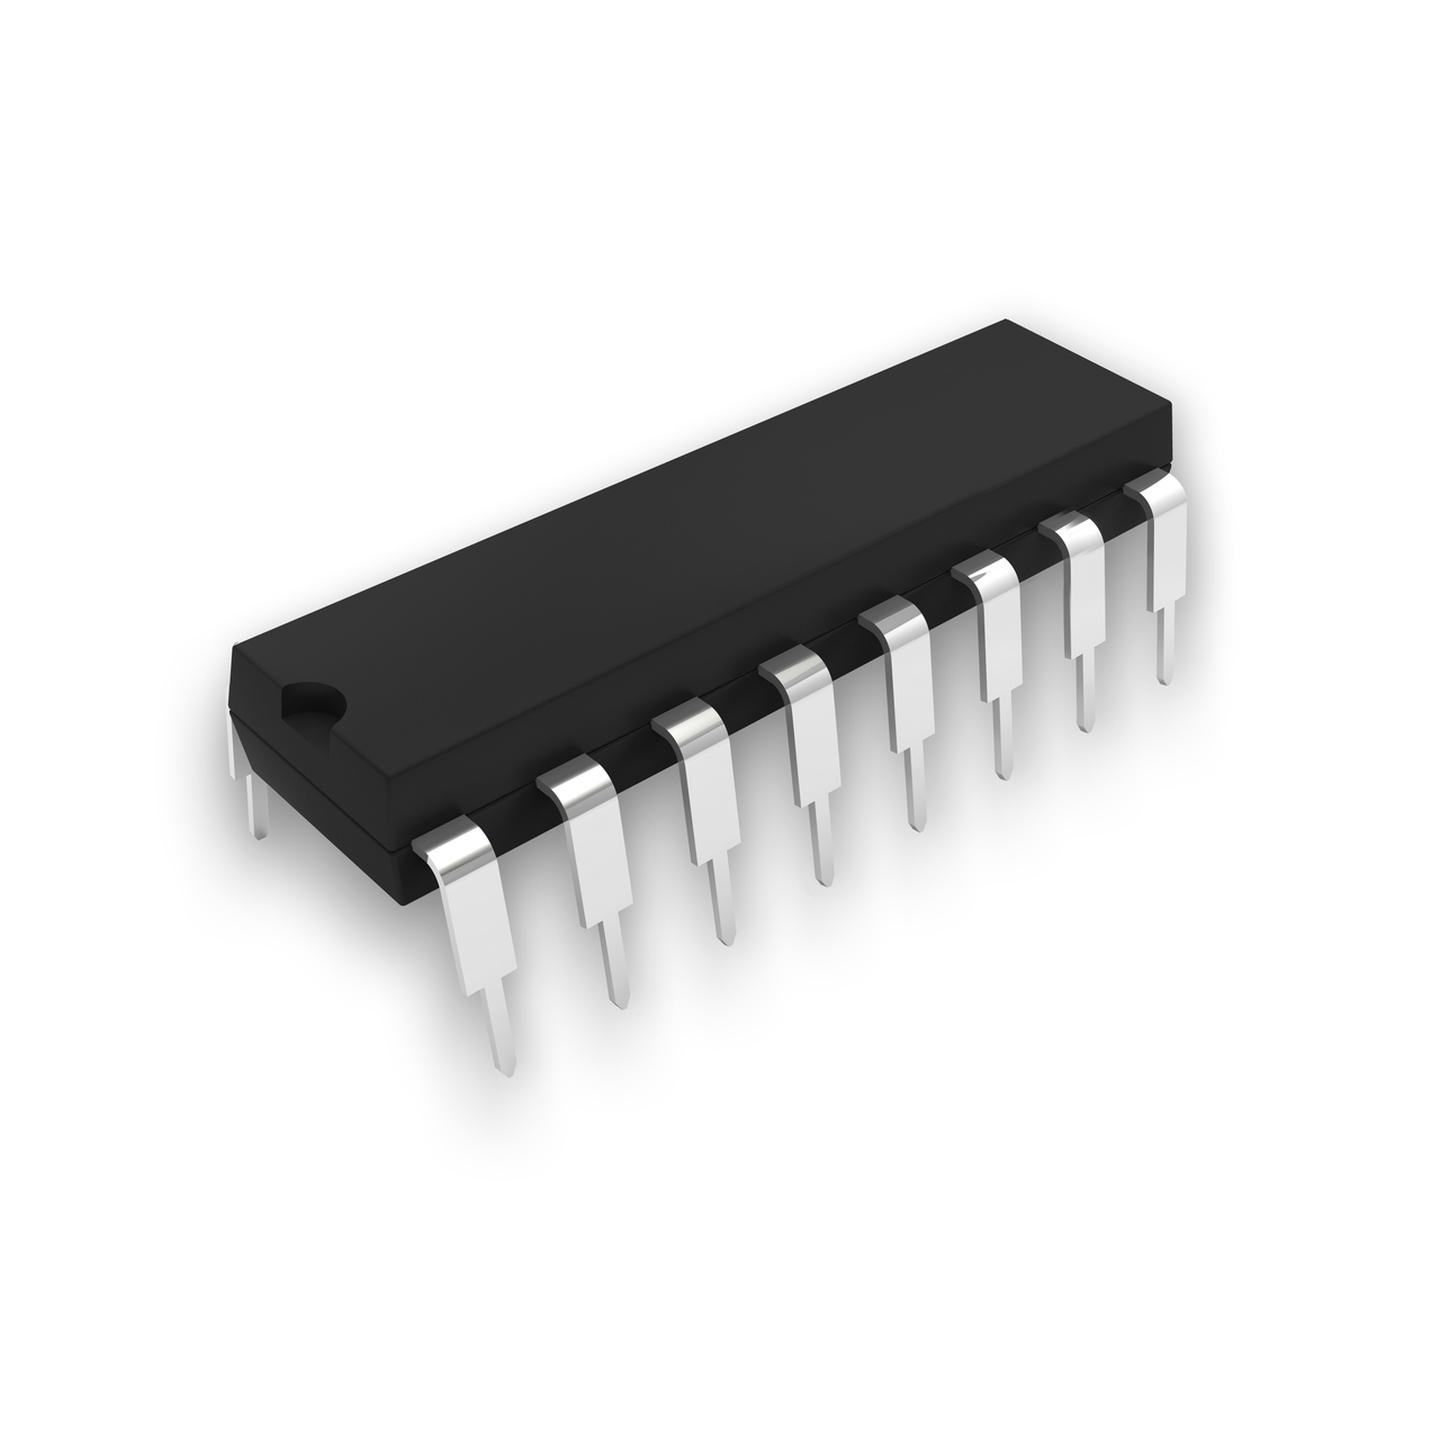 74HC165 8-bit parallel in/out Shift Register IC